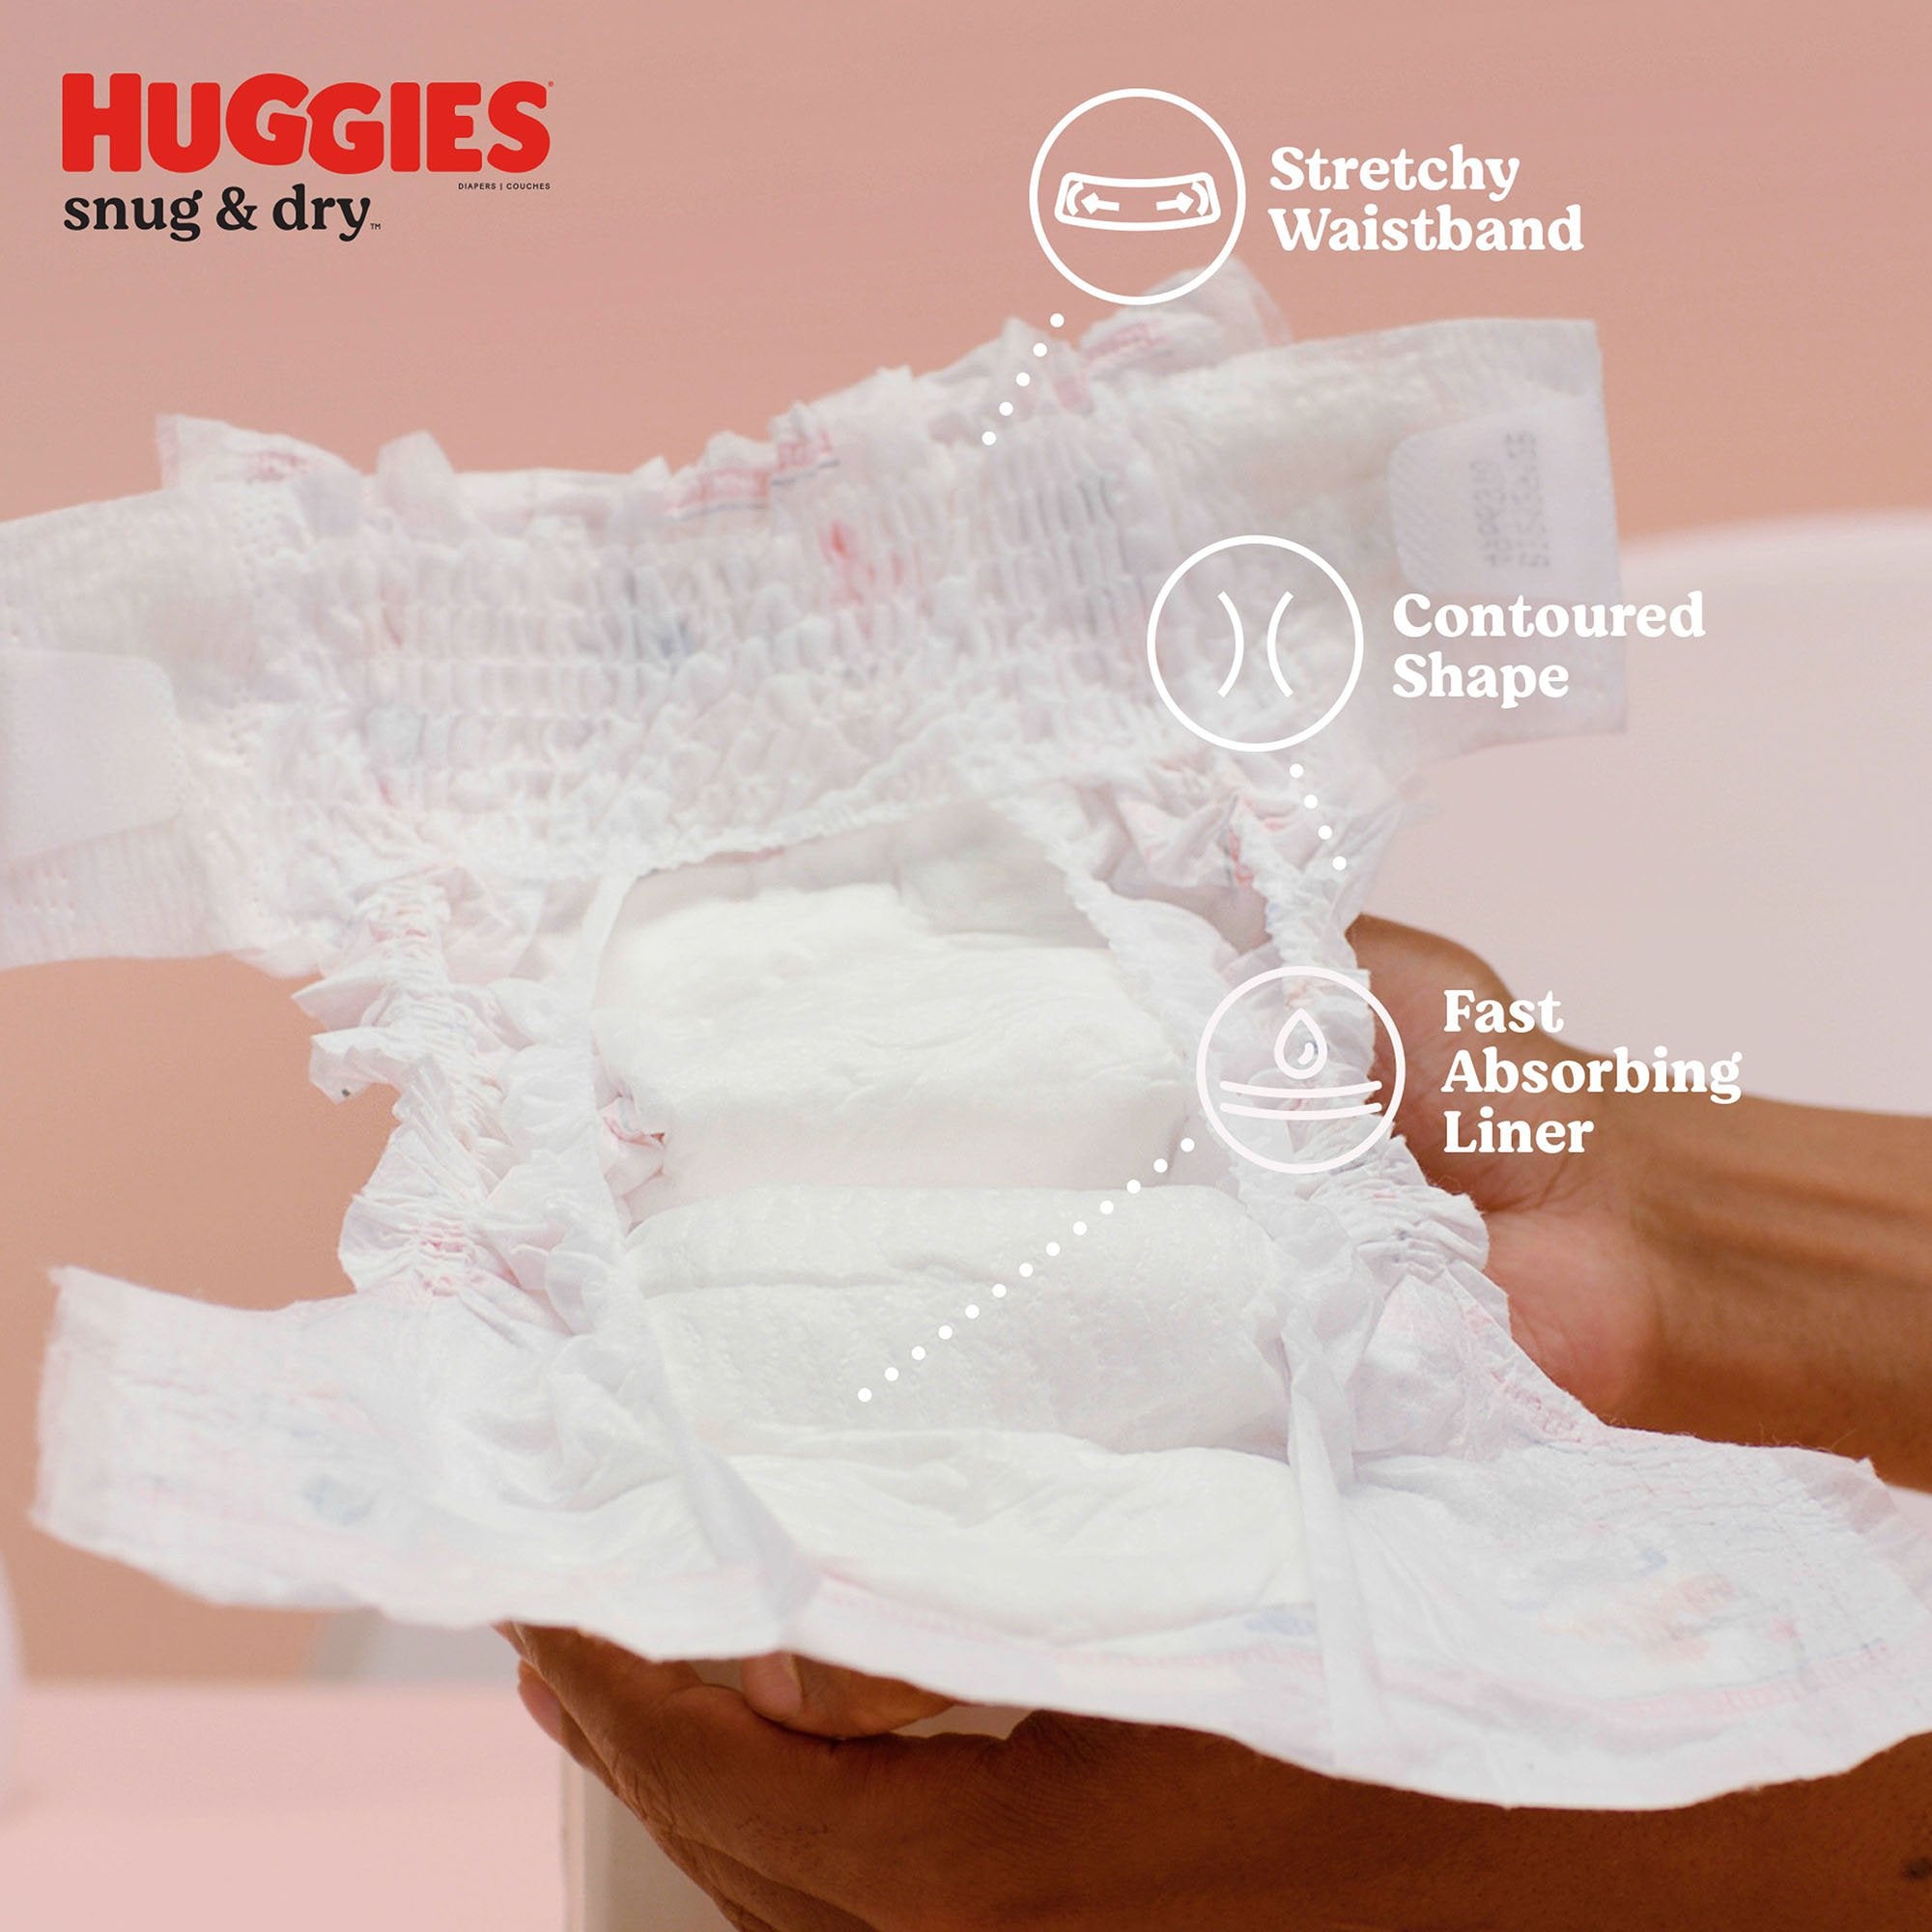 Unisex Baby Diaper Huggies Snug & Dry Size 6 Disposable Heavy Absorbency